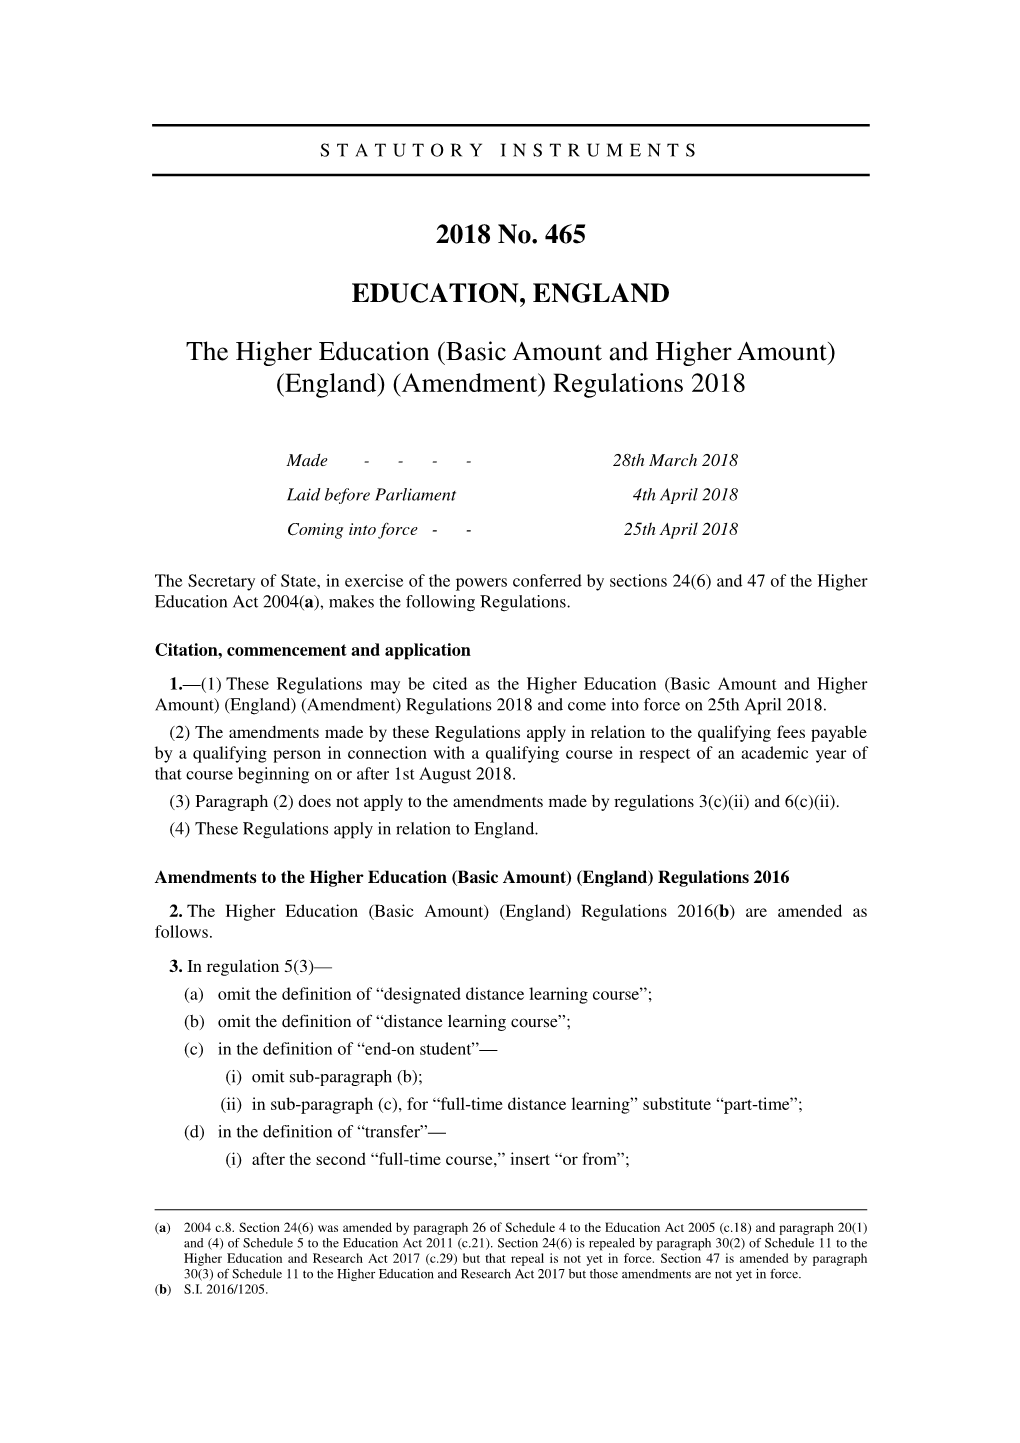 The Higher Education (Basic Amount and Higher Amount) (England) (Amendment) Regulations 2018